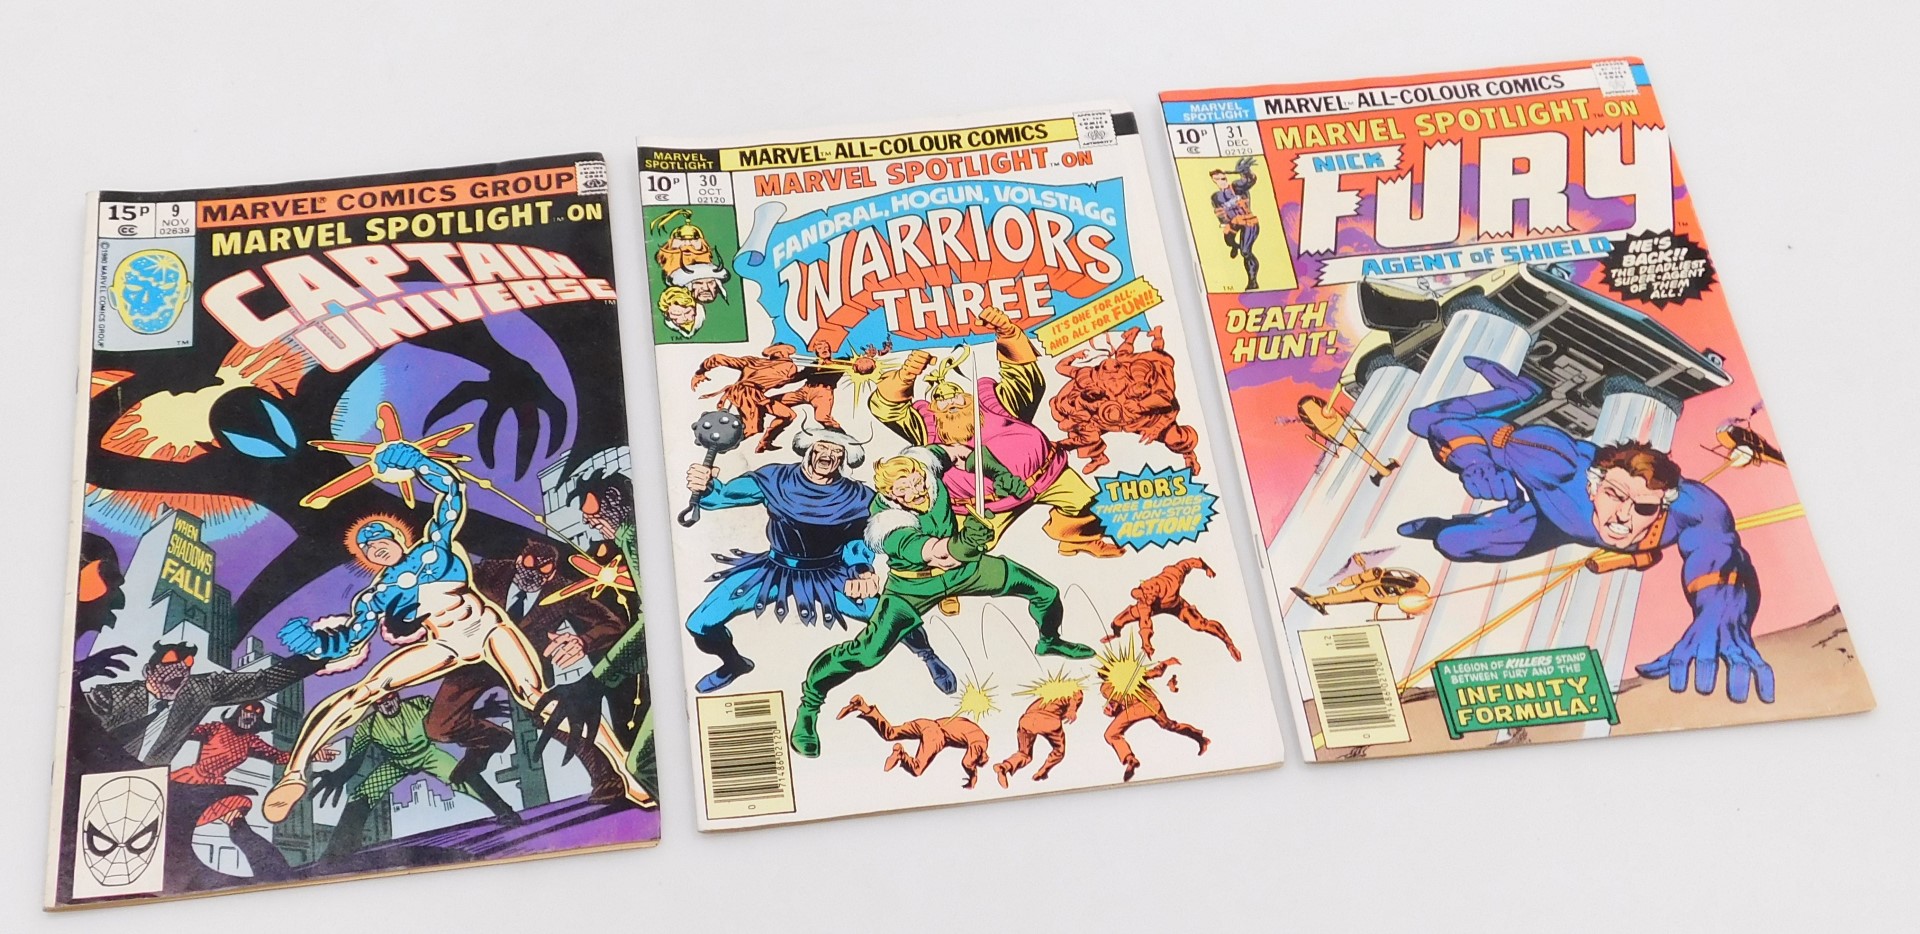 Marvel comics. Three editions of Marvel Spotlight On..., issues 9, 30 and 31, (Bronze Age). - Image 2 of 2